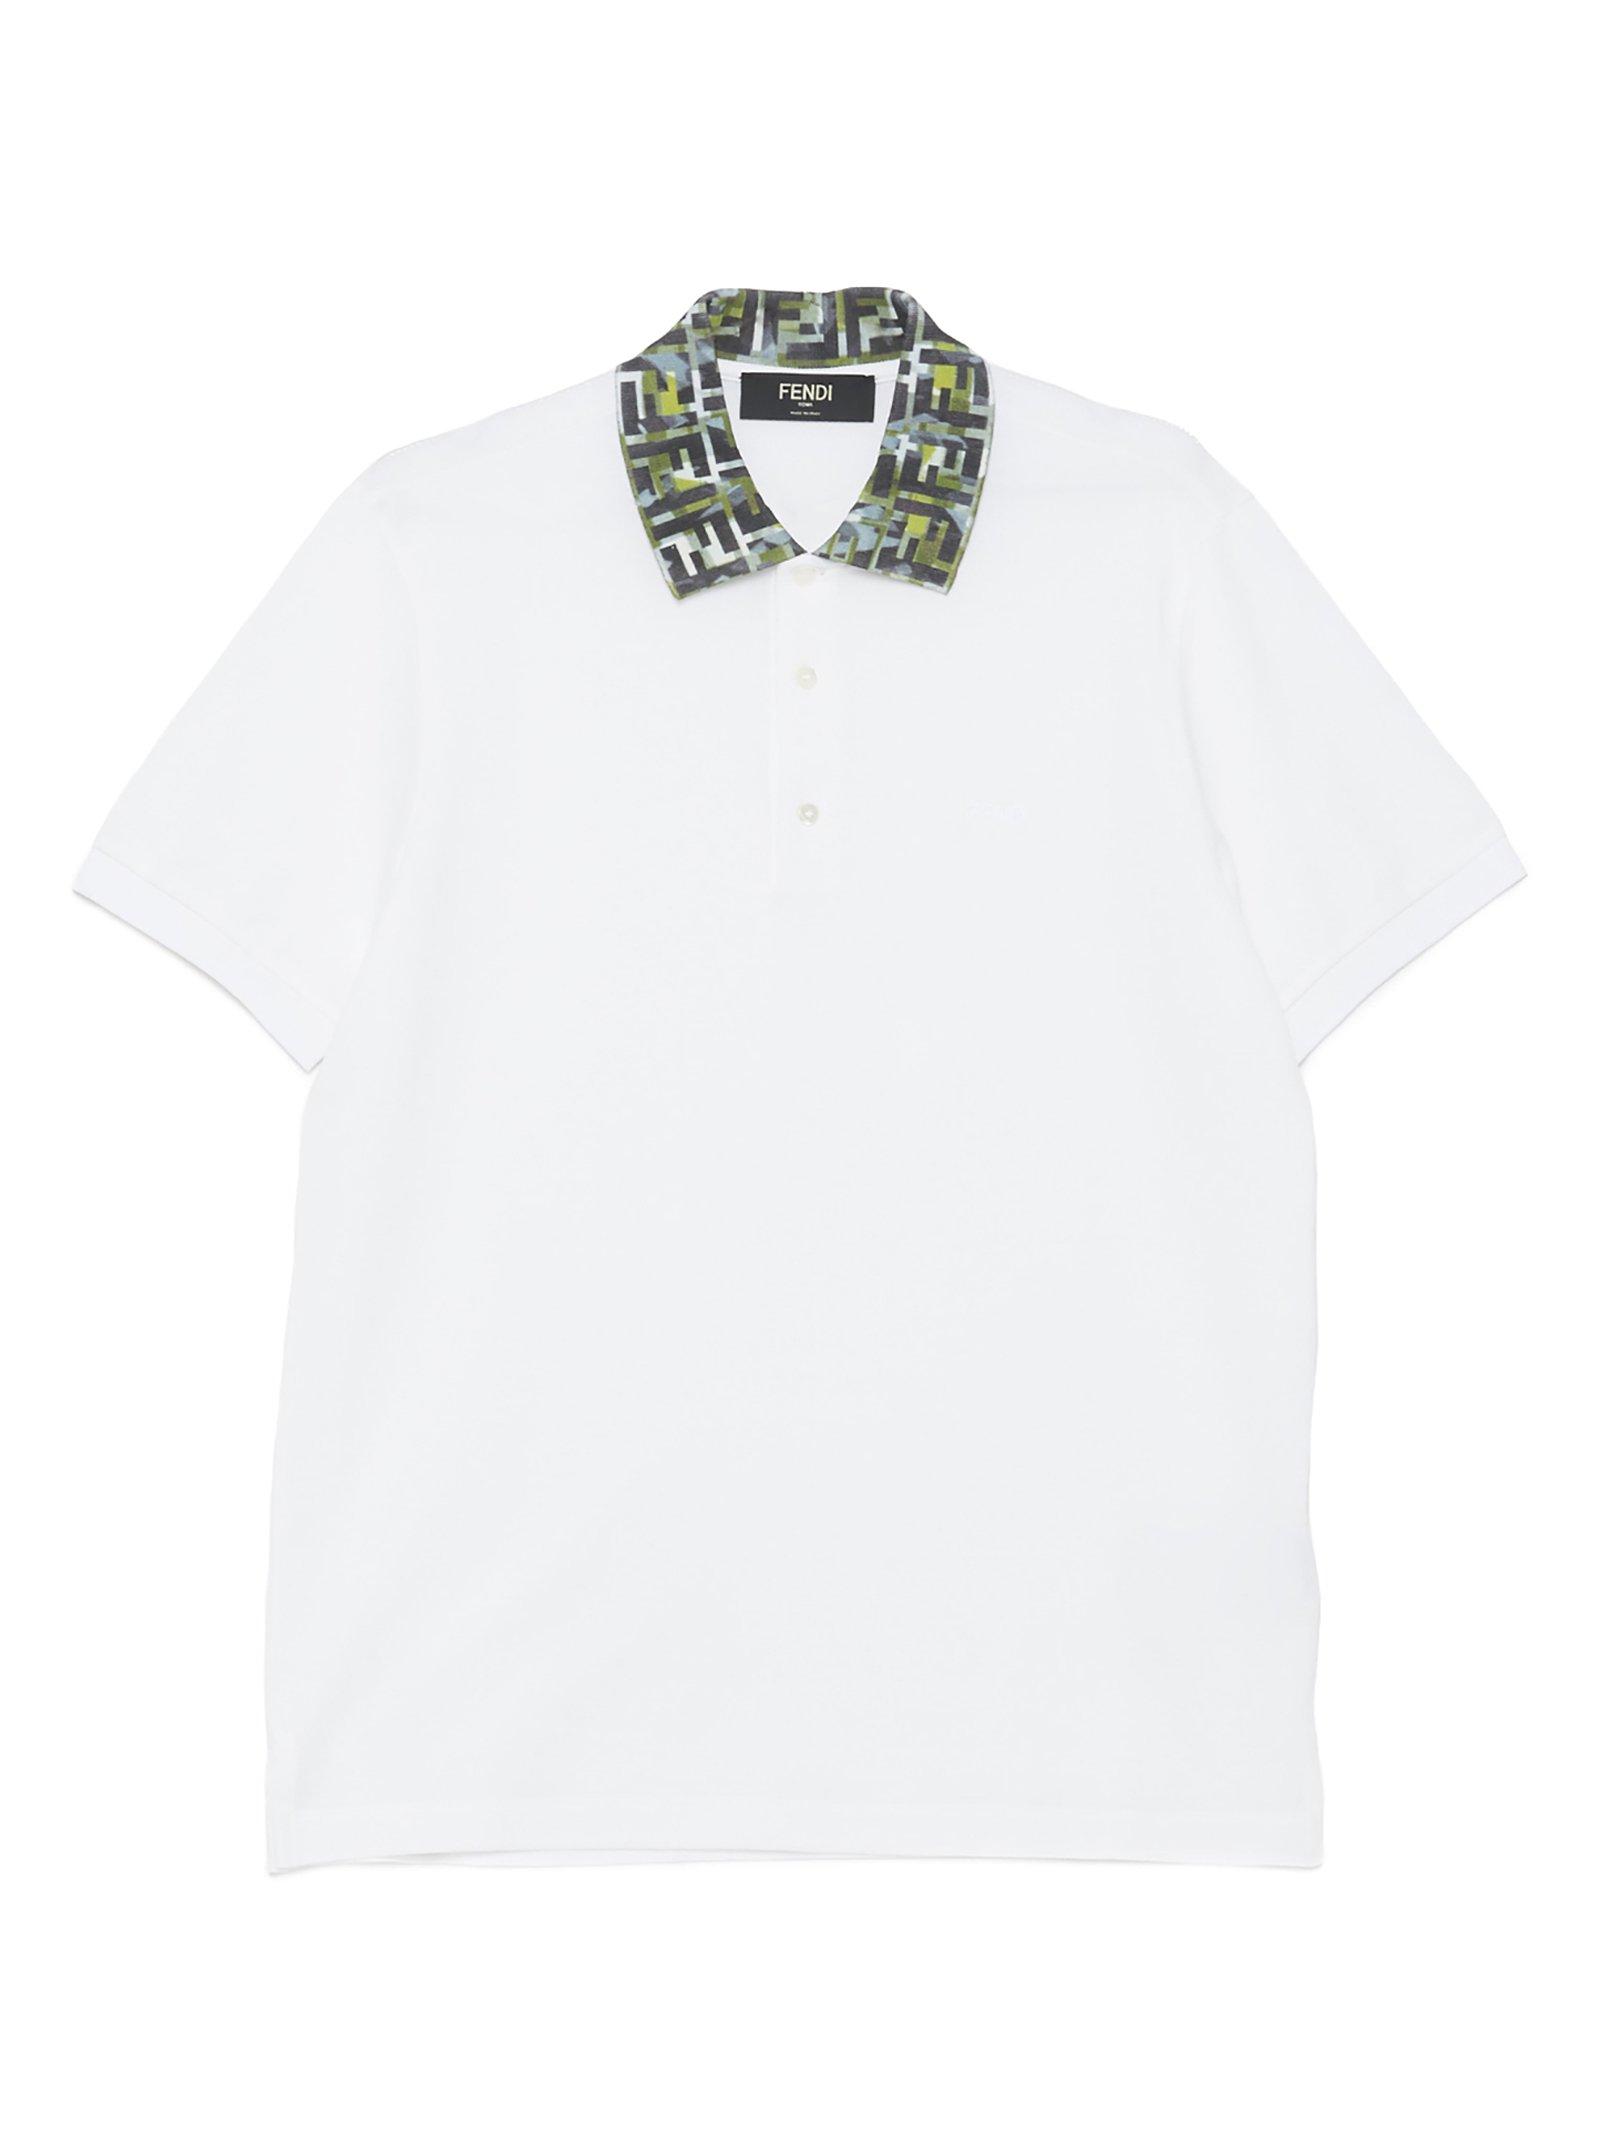 Fendi Cotton Ff Camouflage Collared Polo Shirt in White for Men - Lyst